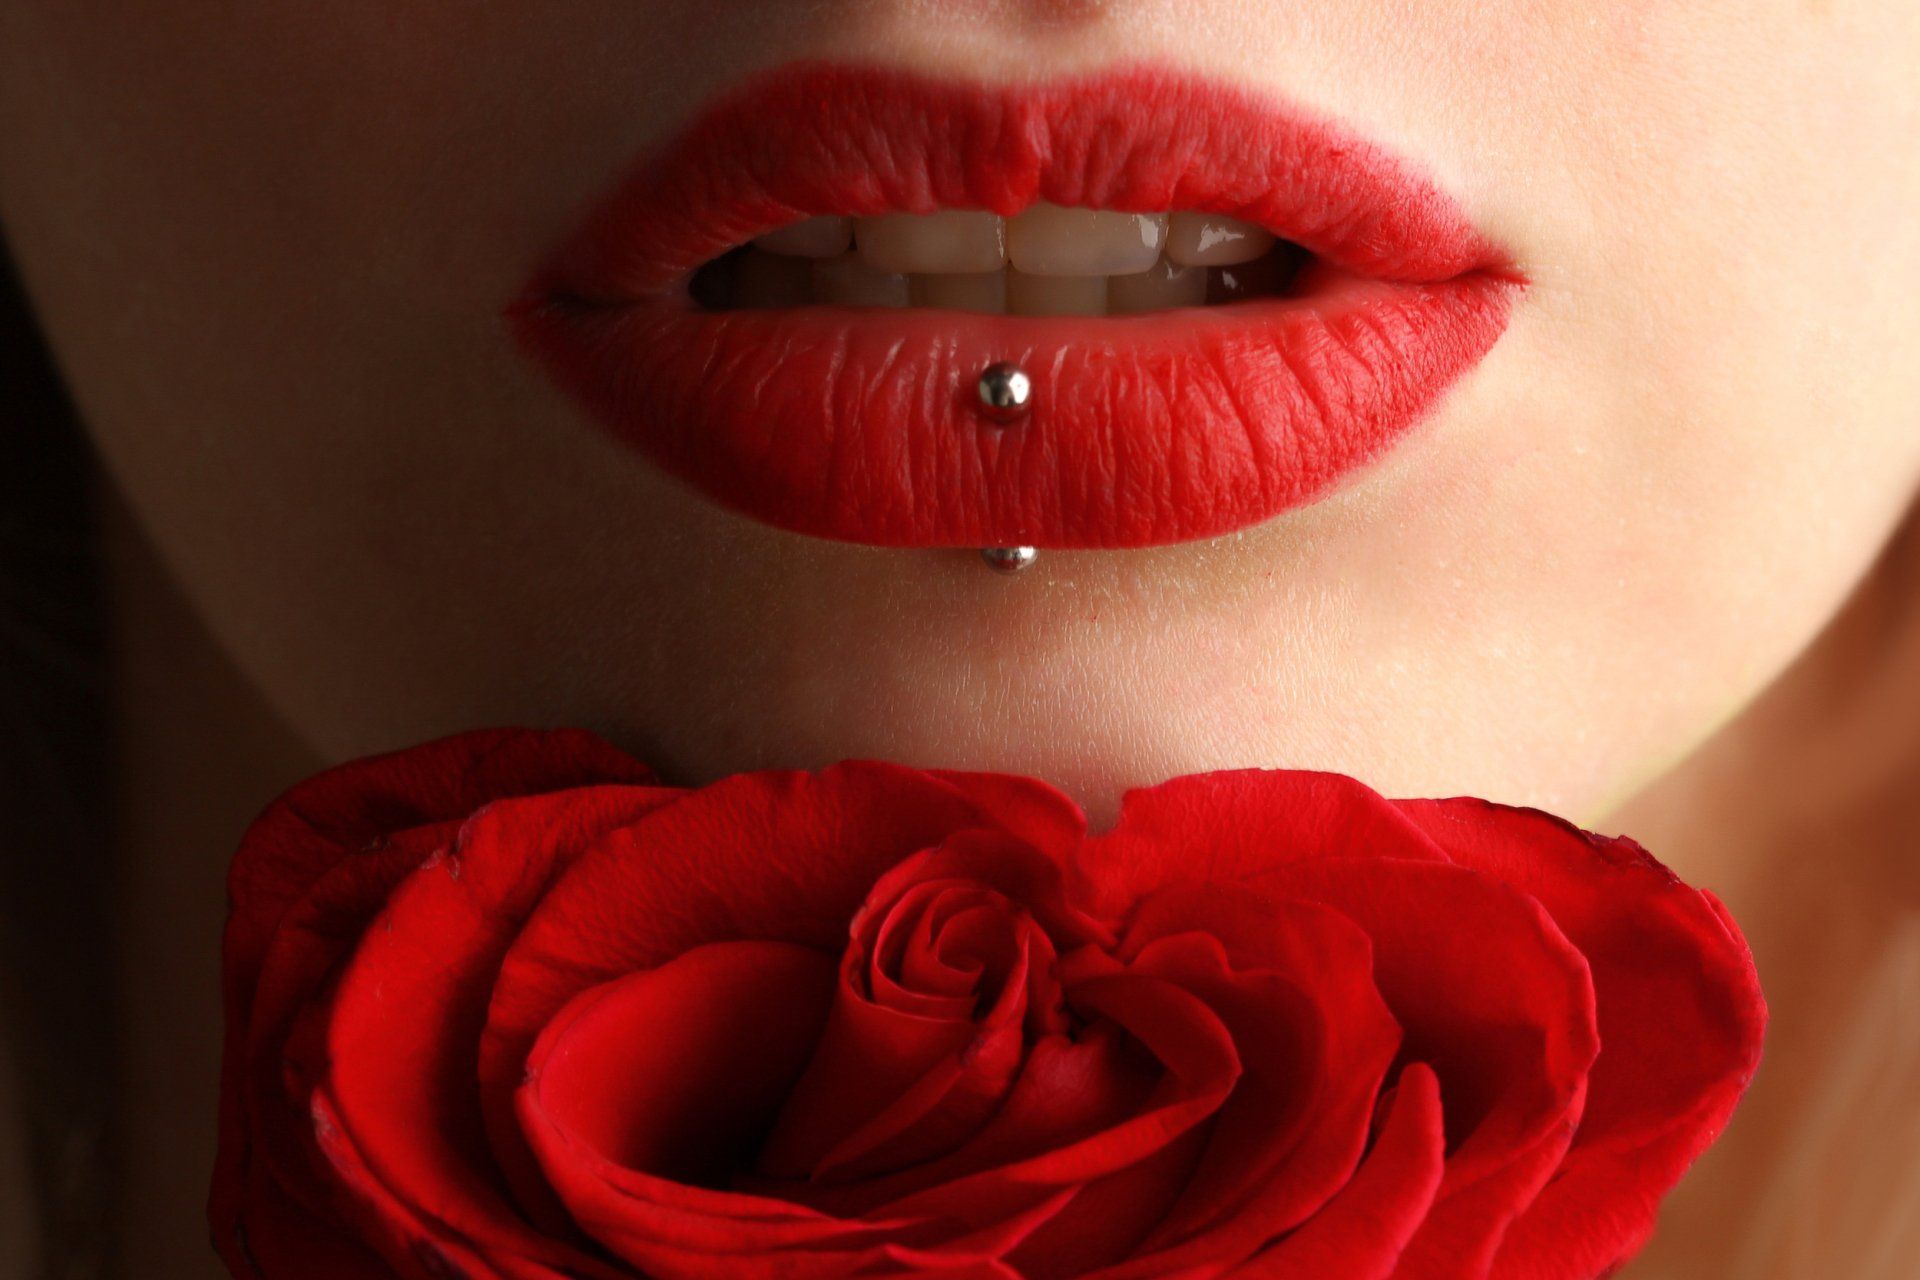 A woman with red lips and a red rose in her mouth